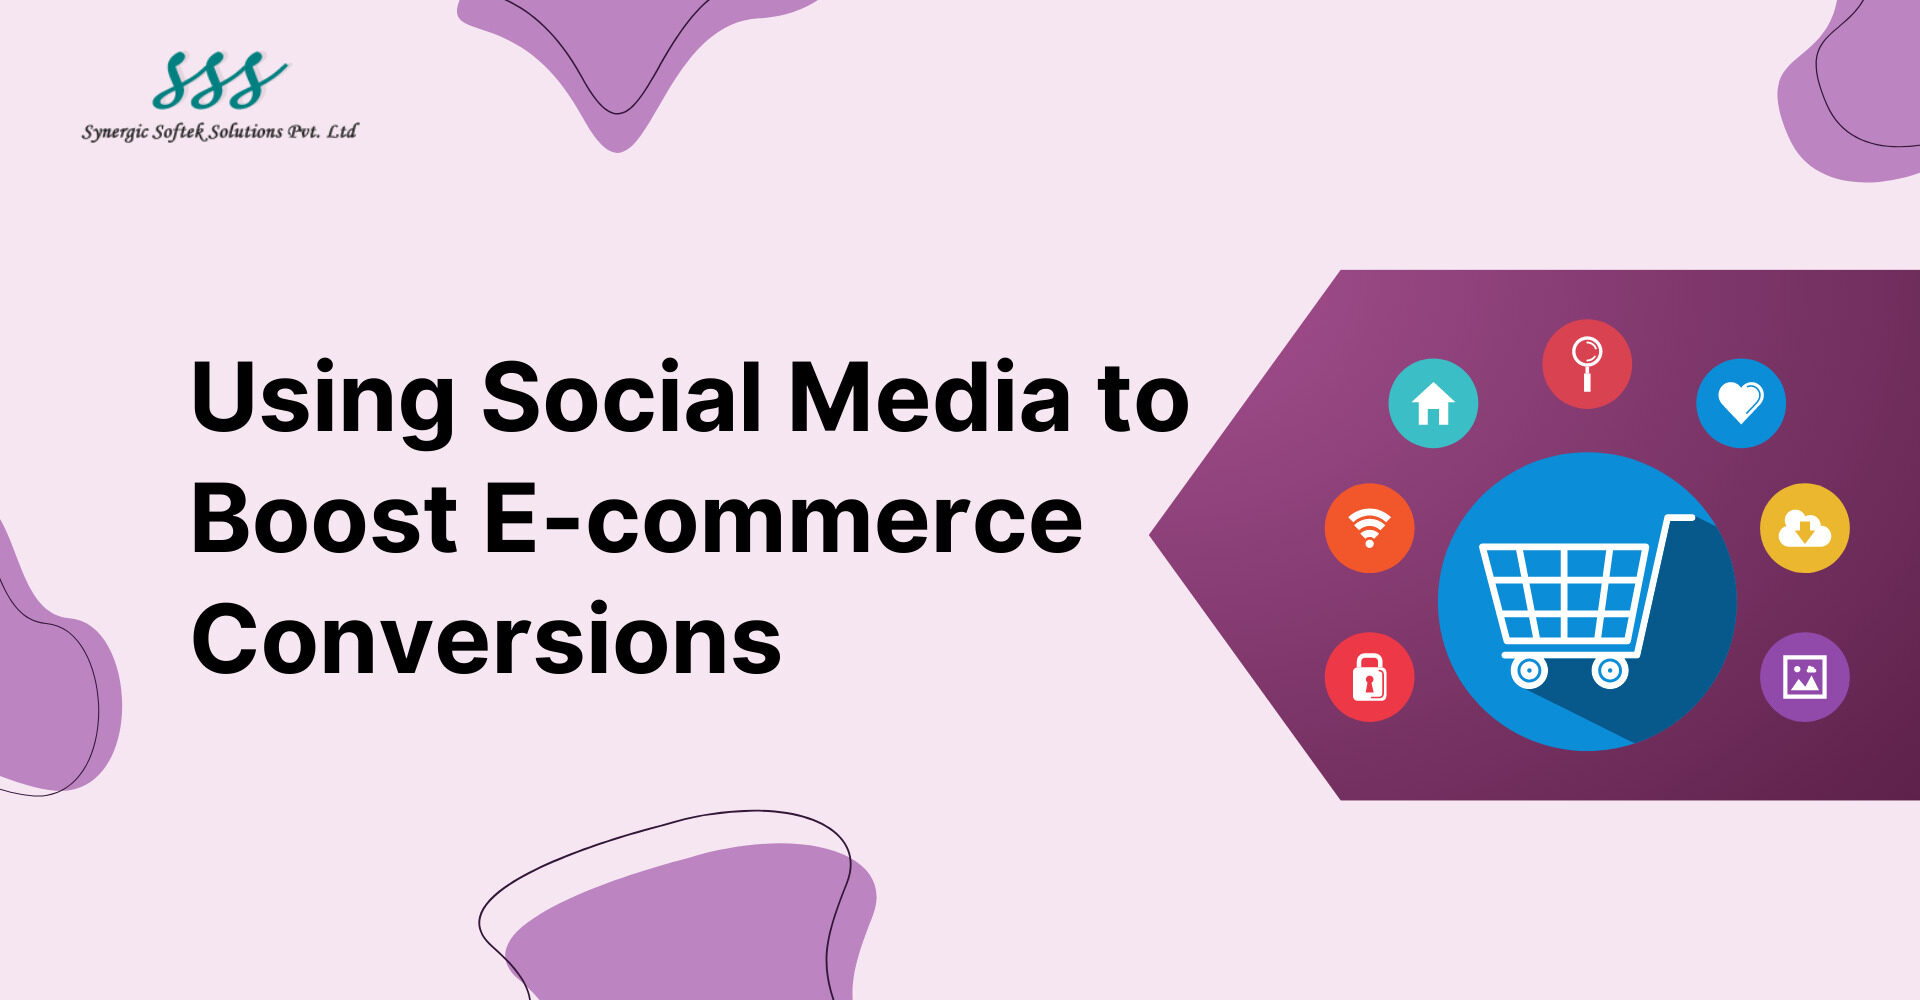 Using Social Media to Boost E-commerce Conversions